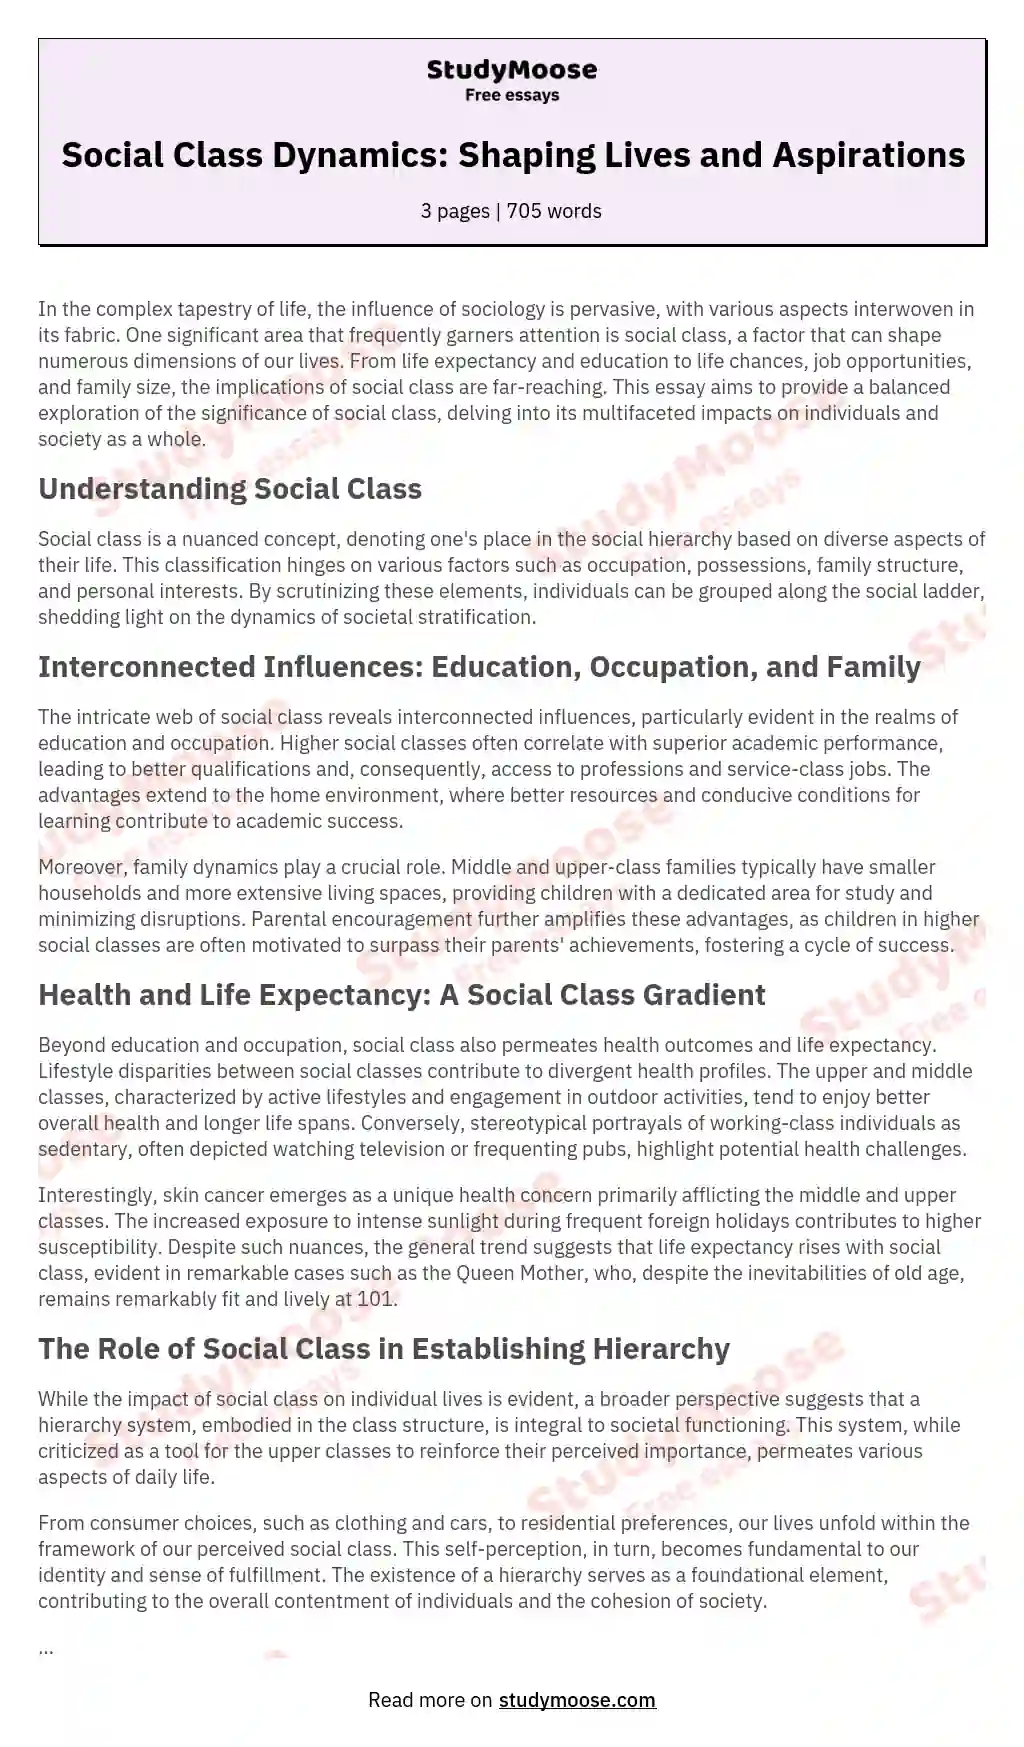 Social Class Dynamics: Shaping Lives and Aspirations essay